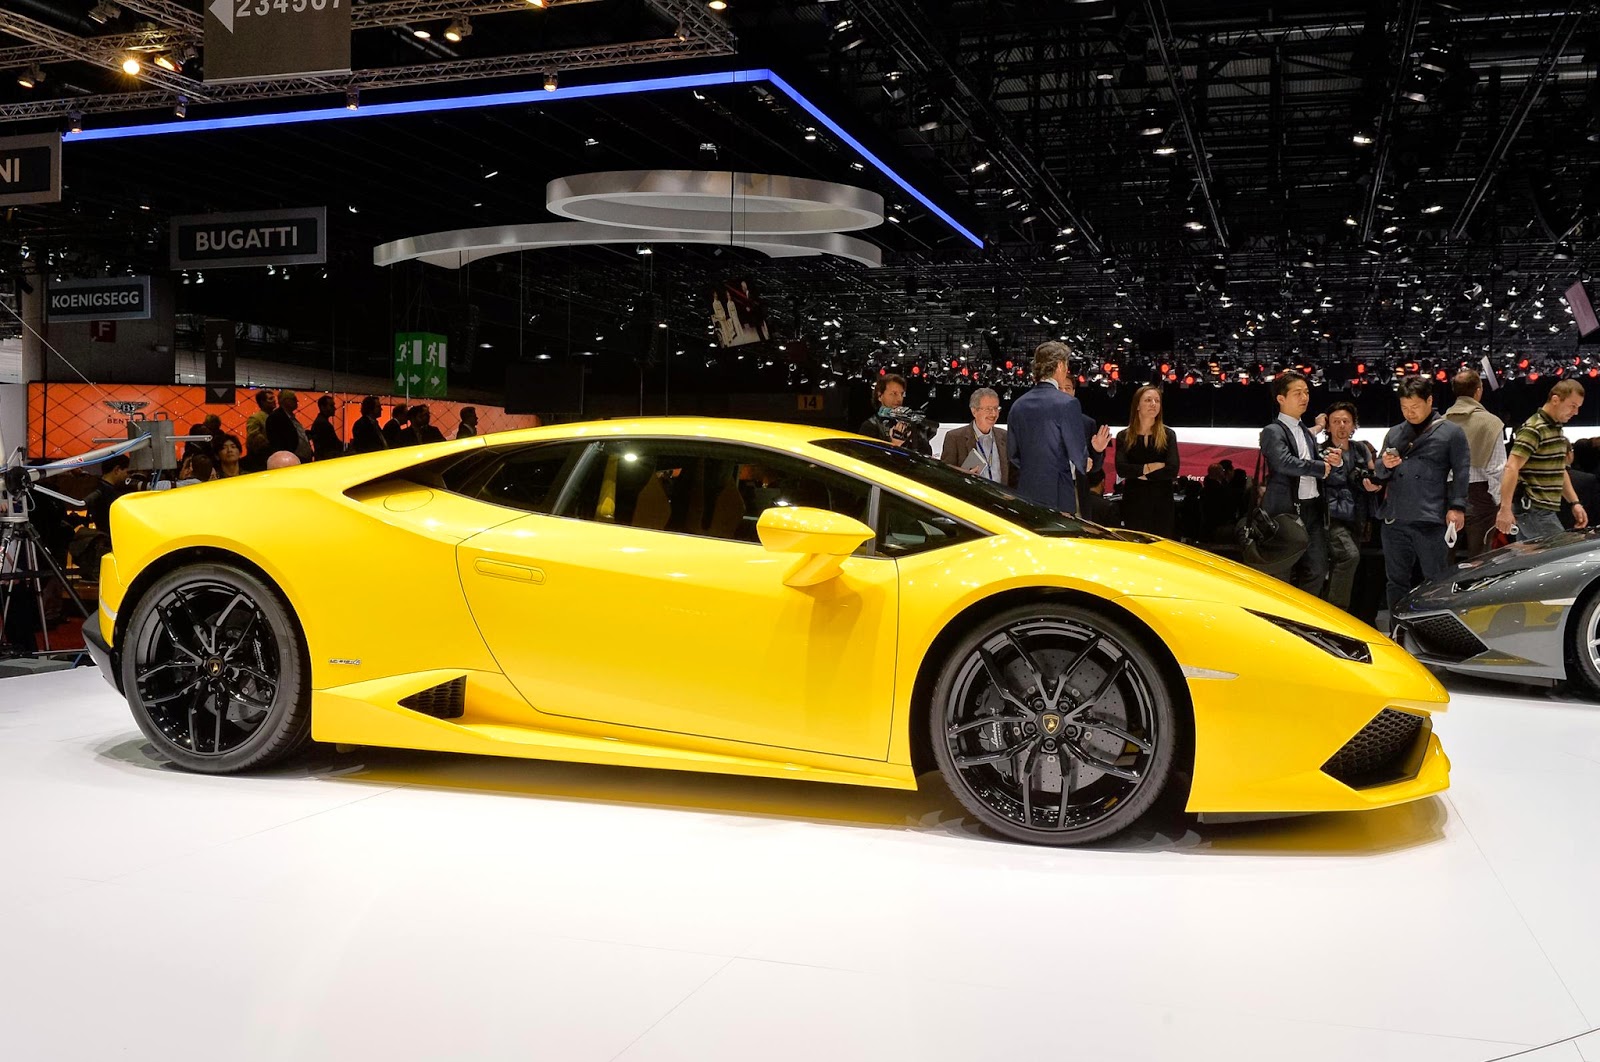 Lamborghini Huracan India Price and Specifications |TechGangs